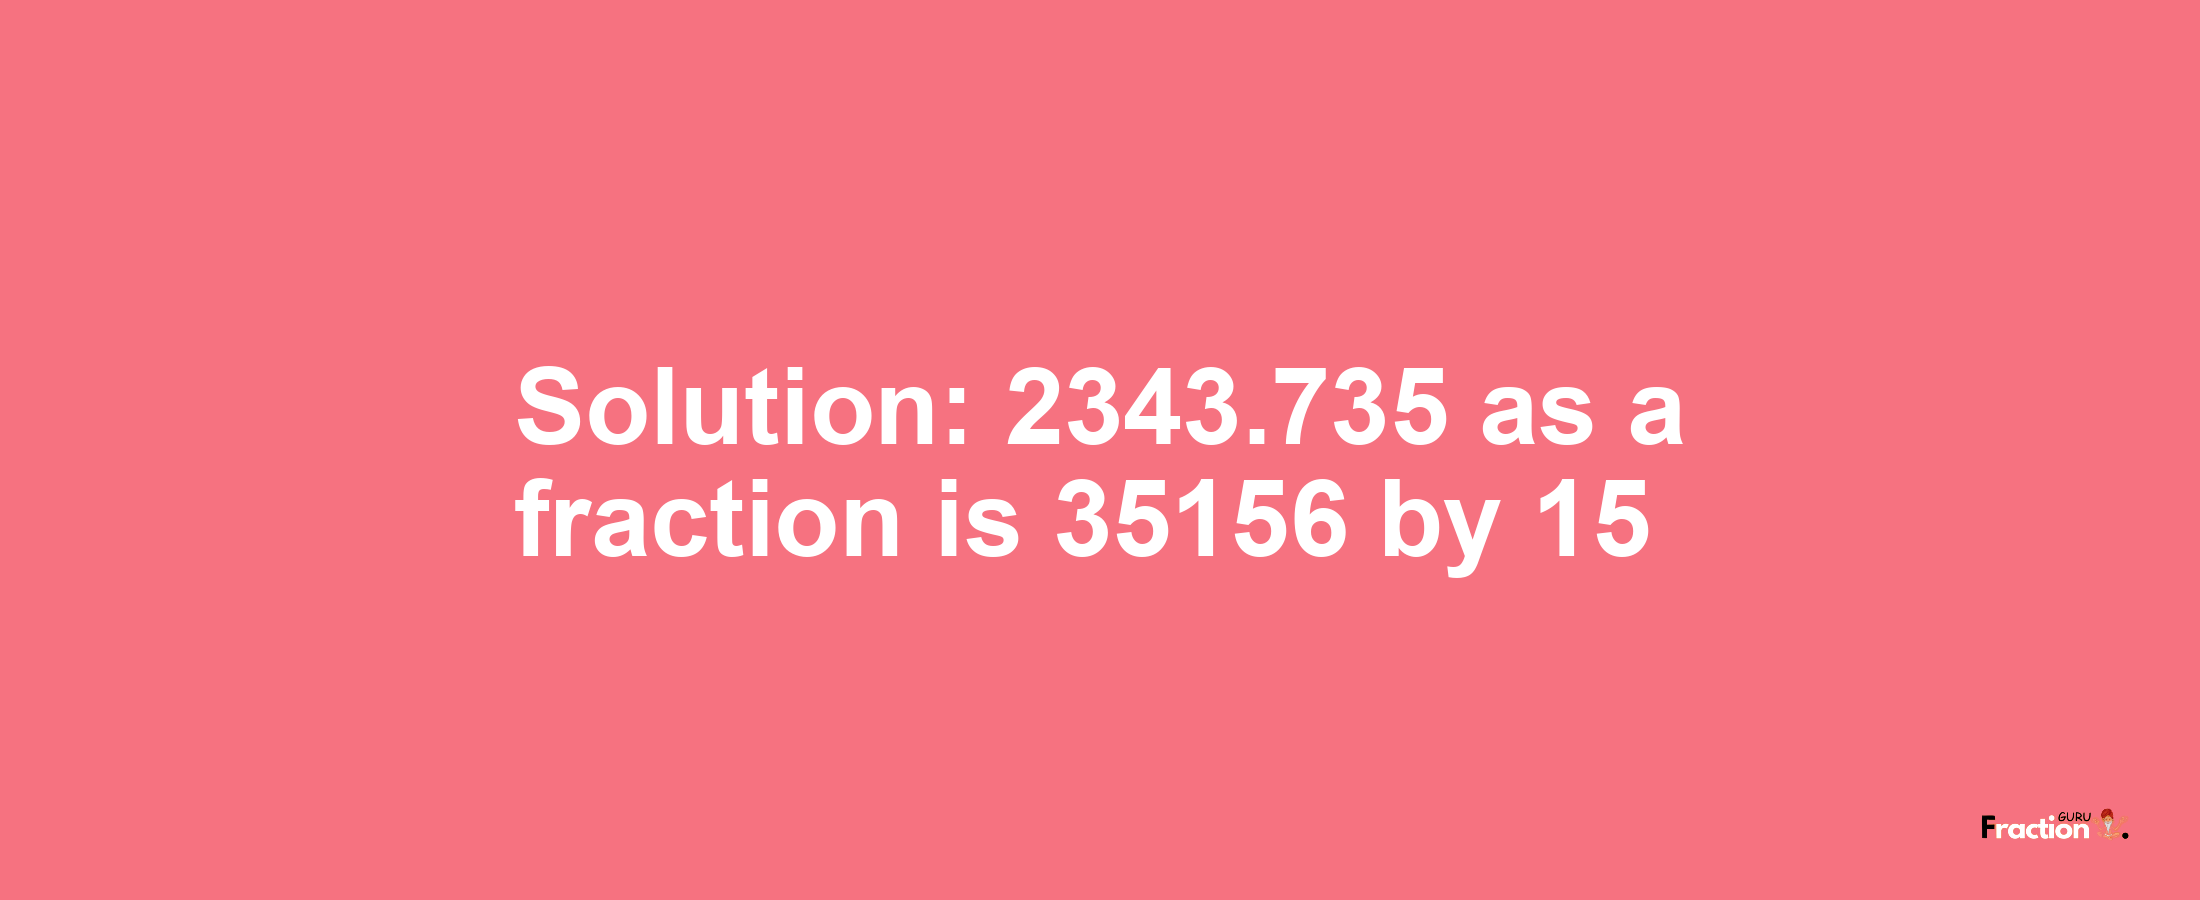 Solution:2343.735 as a fraction is 35156/15